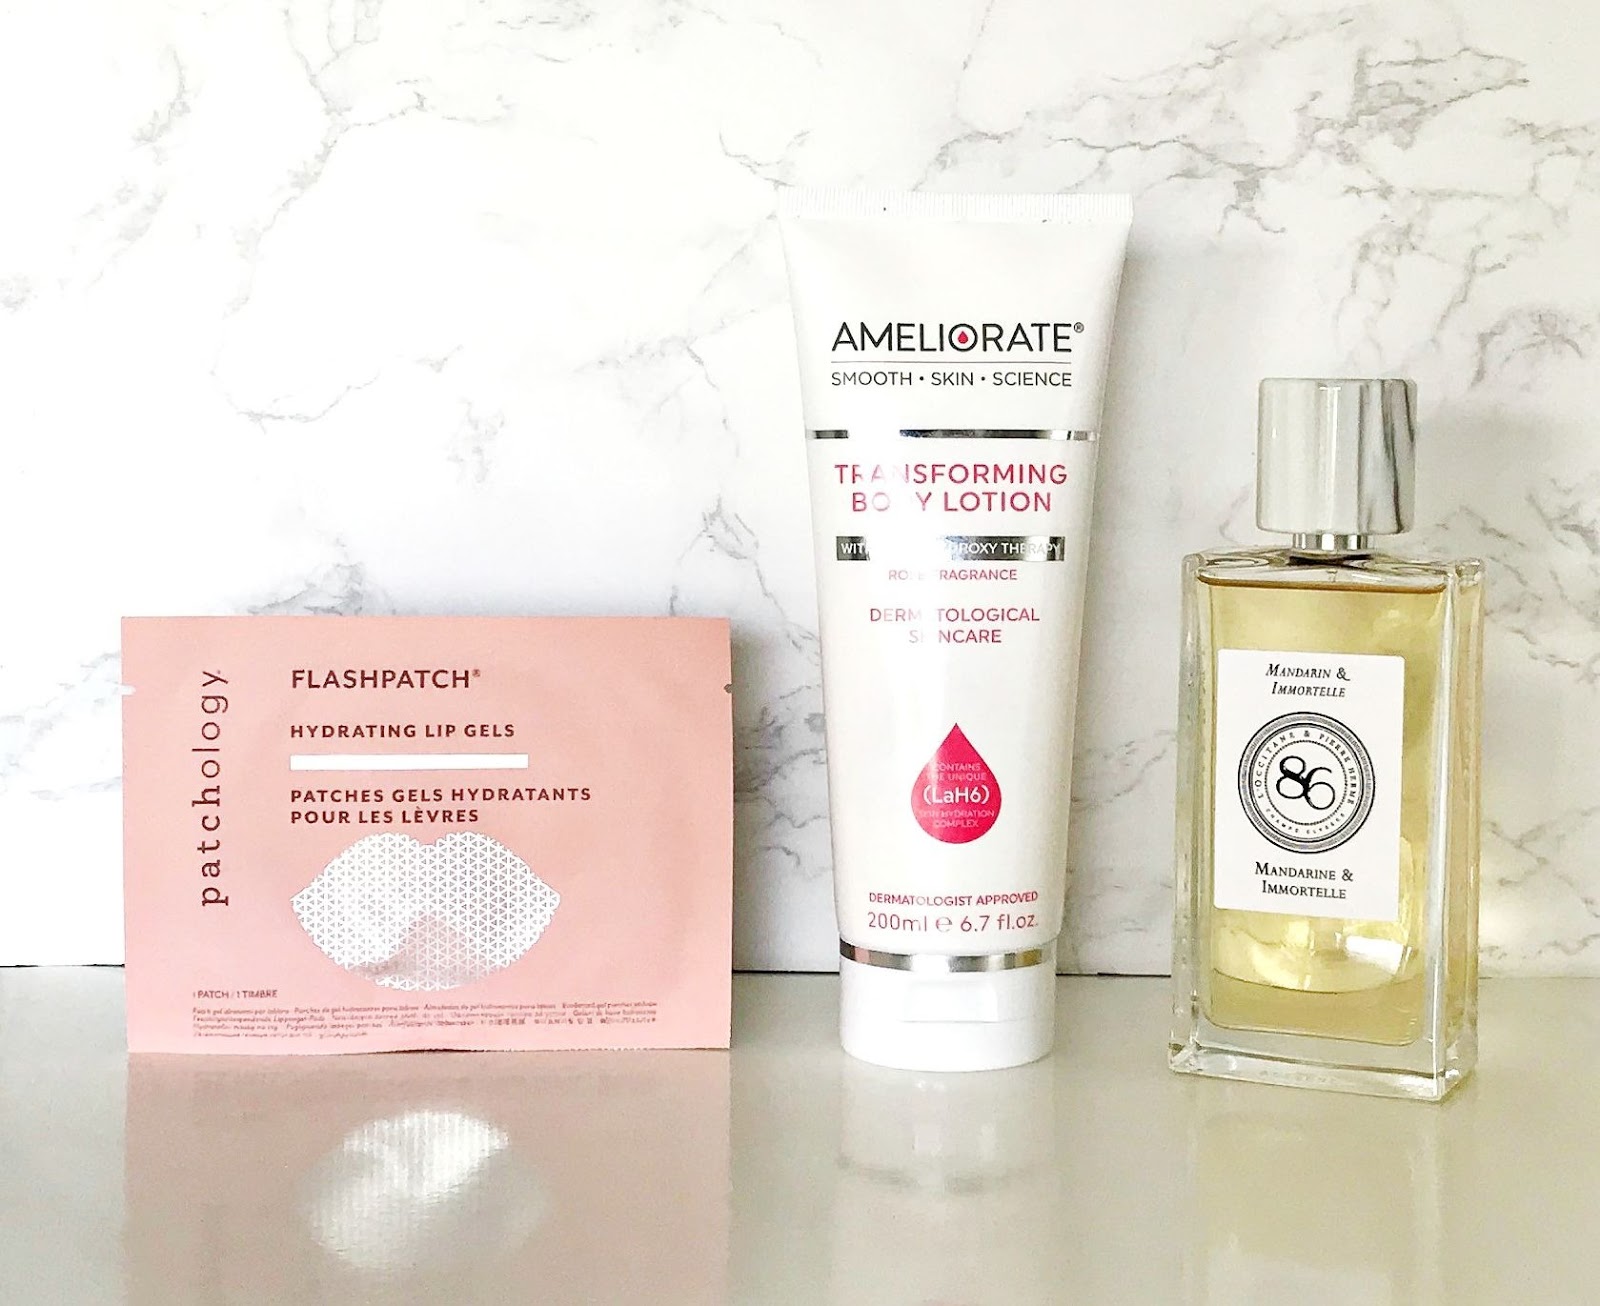 3 treats for 3 budgets, Patchology FlashPatch Hydrating Lip Gels, Ameliorate Transforming Body Lotion Rose Limited Edition, L'Occitane MANDARIN & IMMORTELLE,